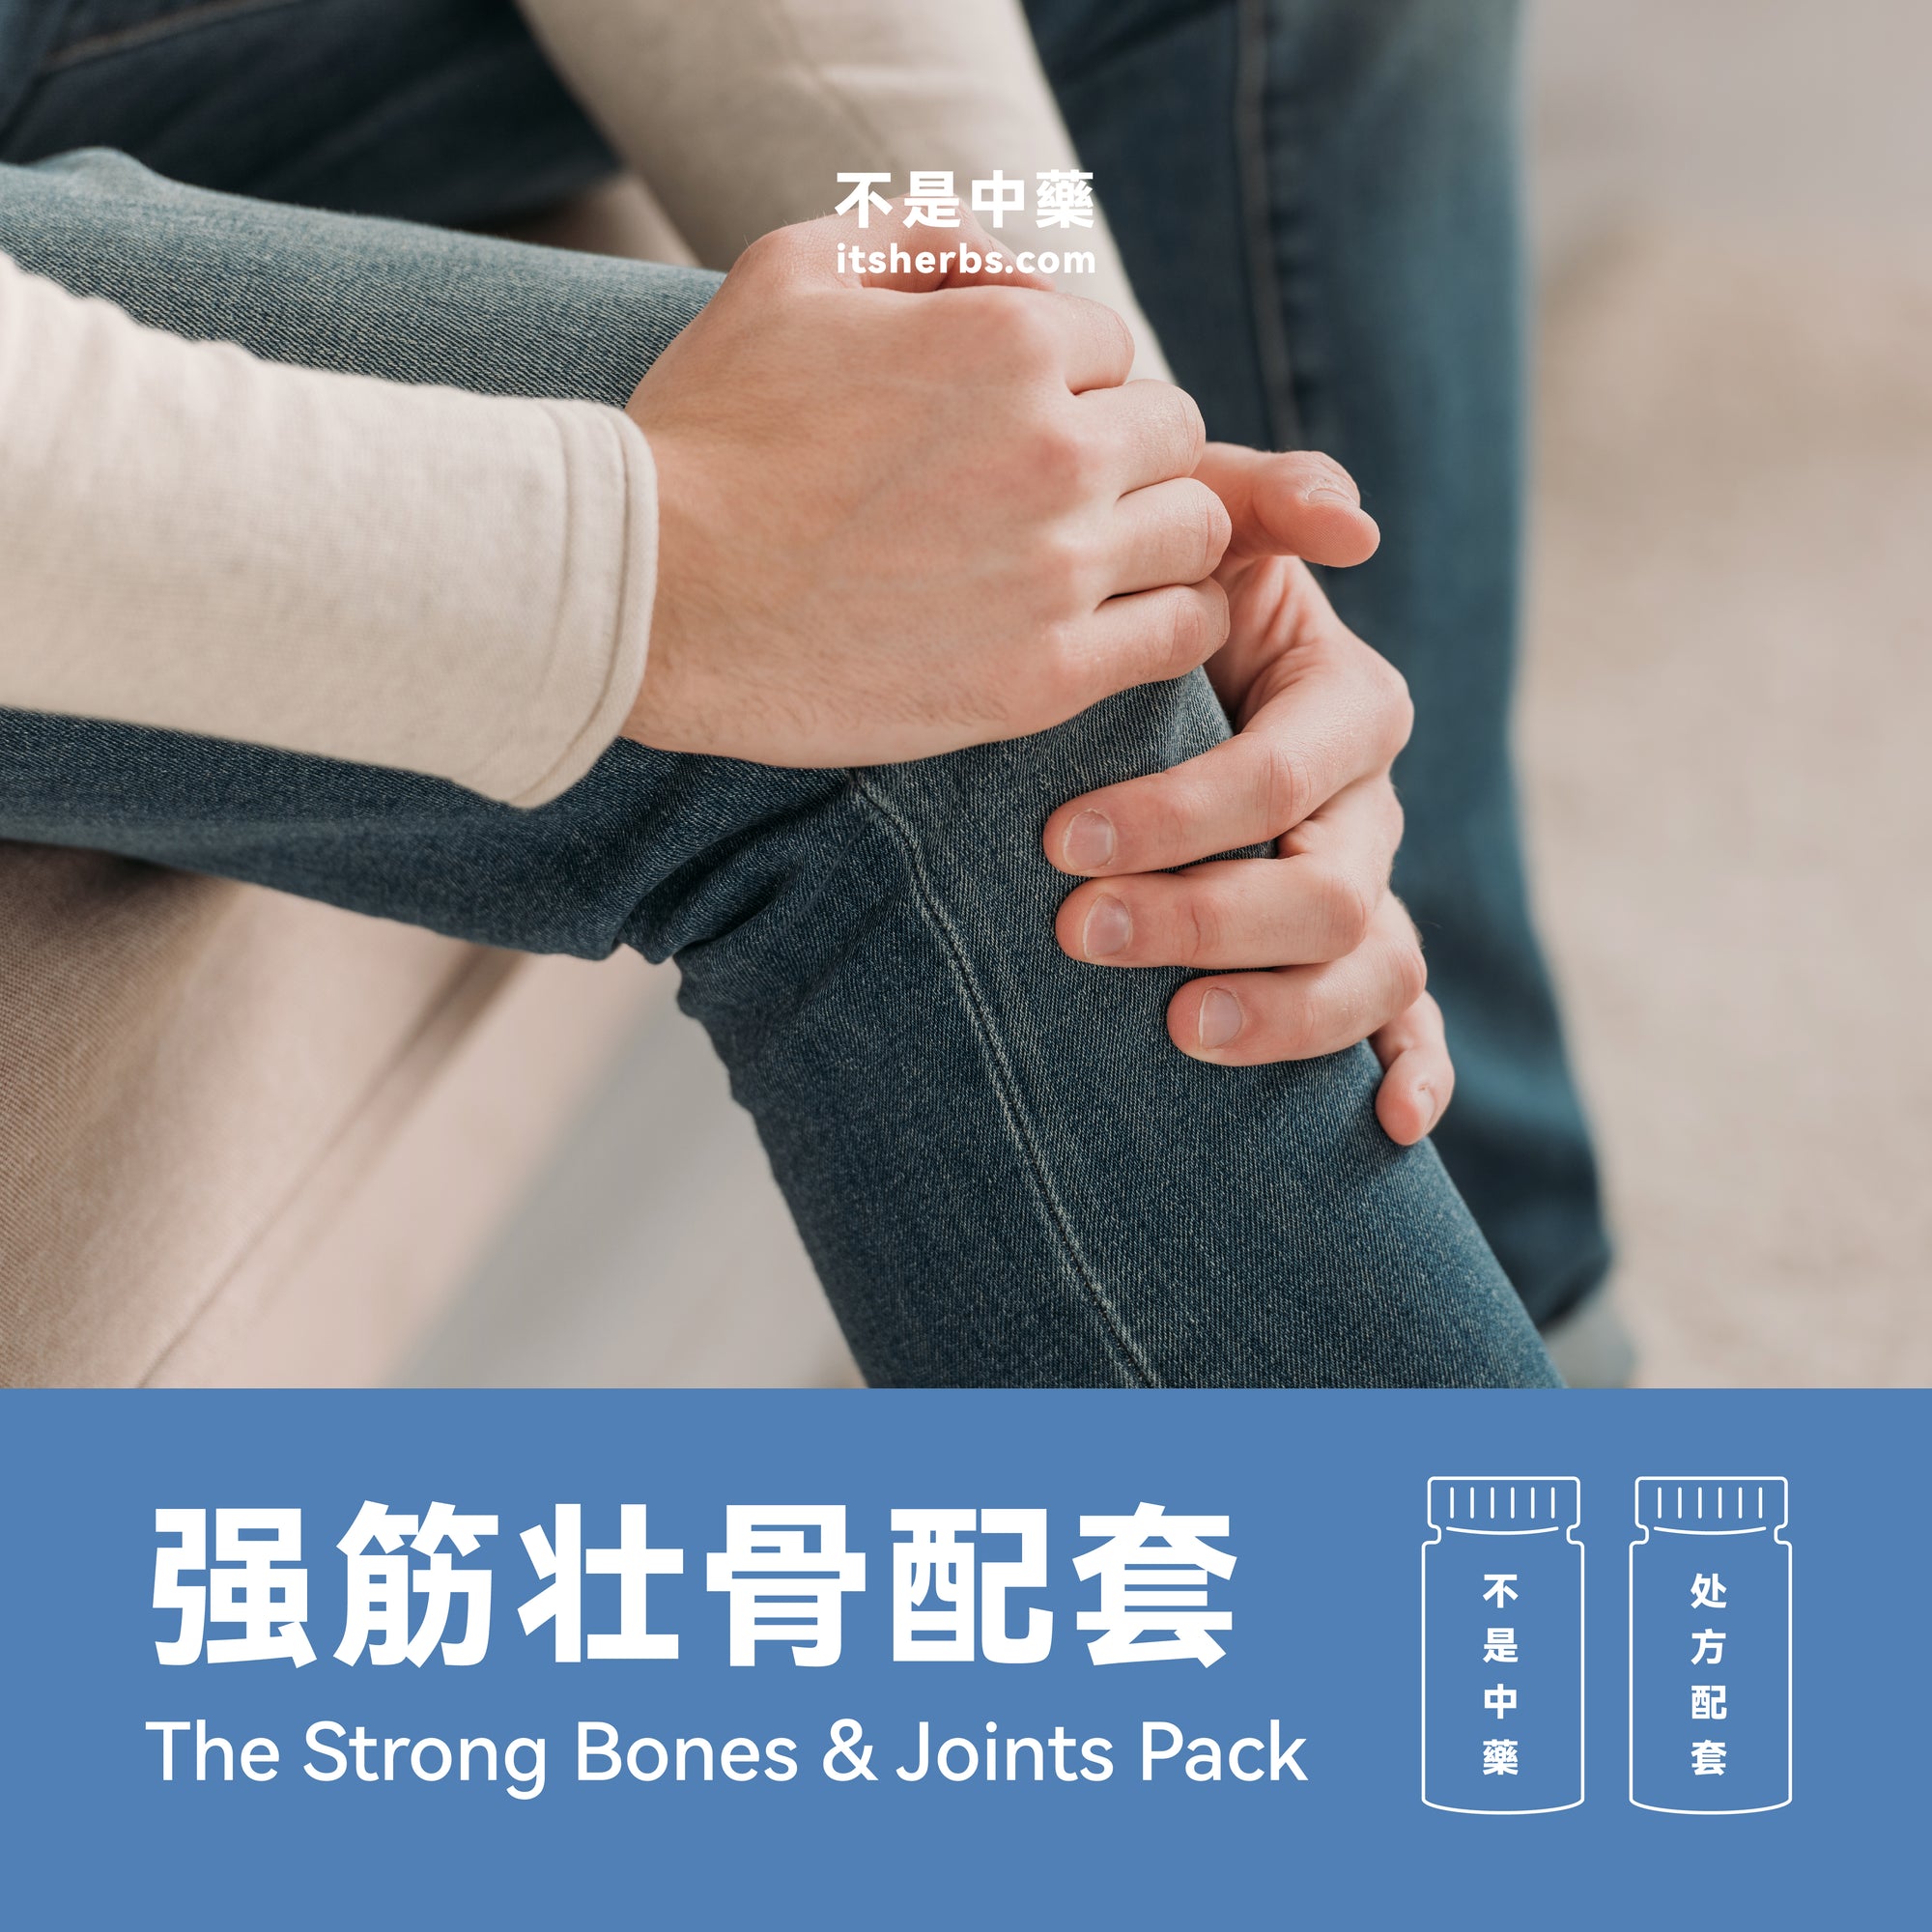 The Strong Bones & Joints Pack